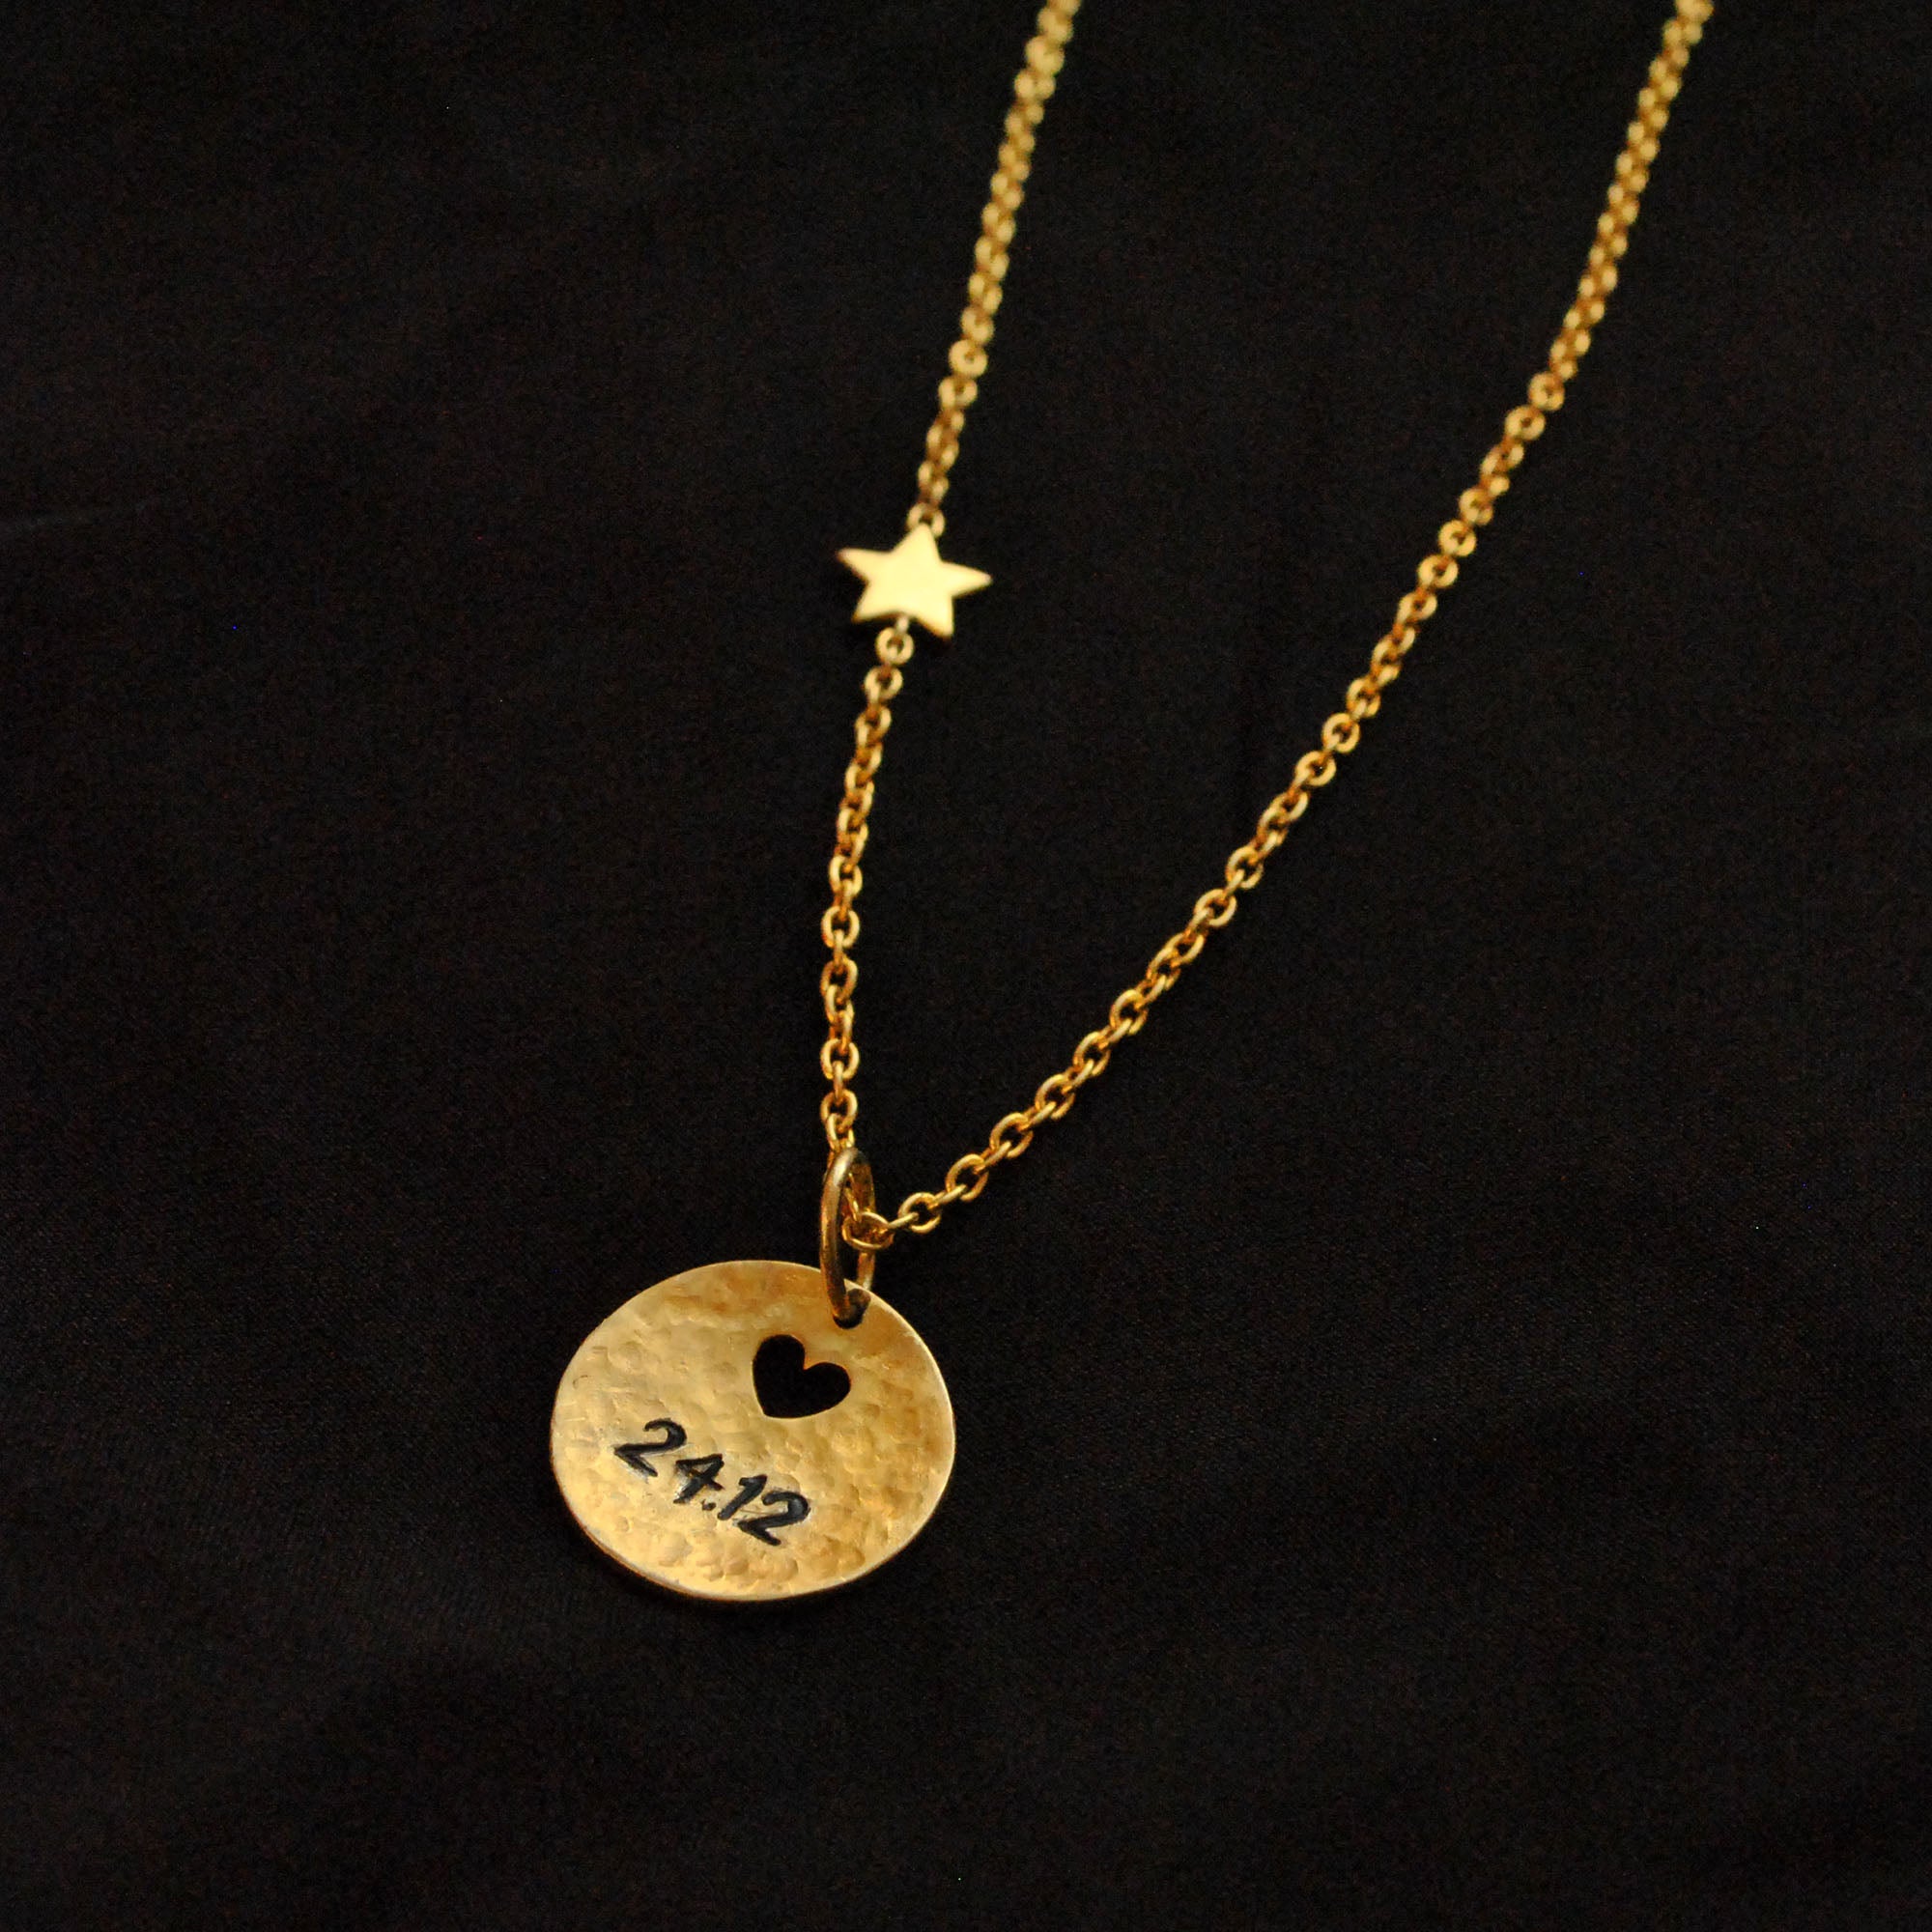 Vintage Charms Necklace in 14K Gold with Heart, Disc & Flower Charms